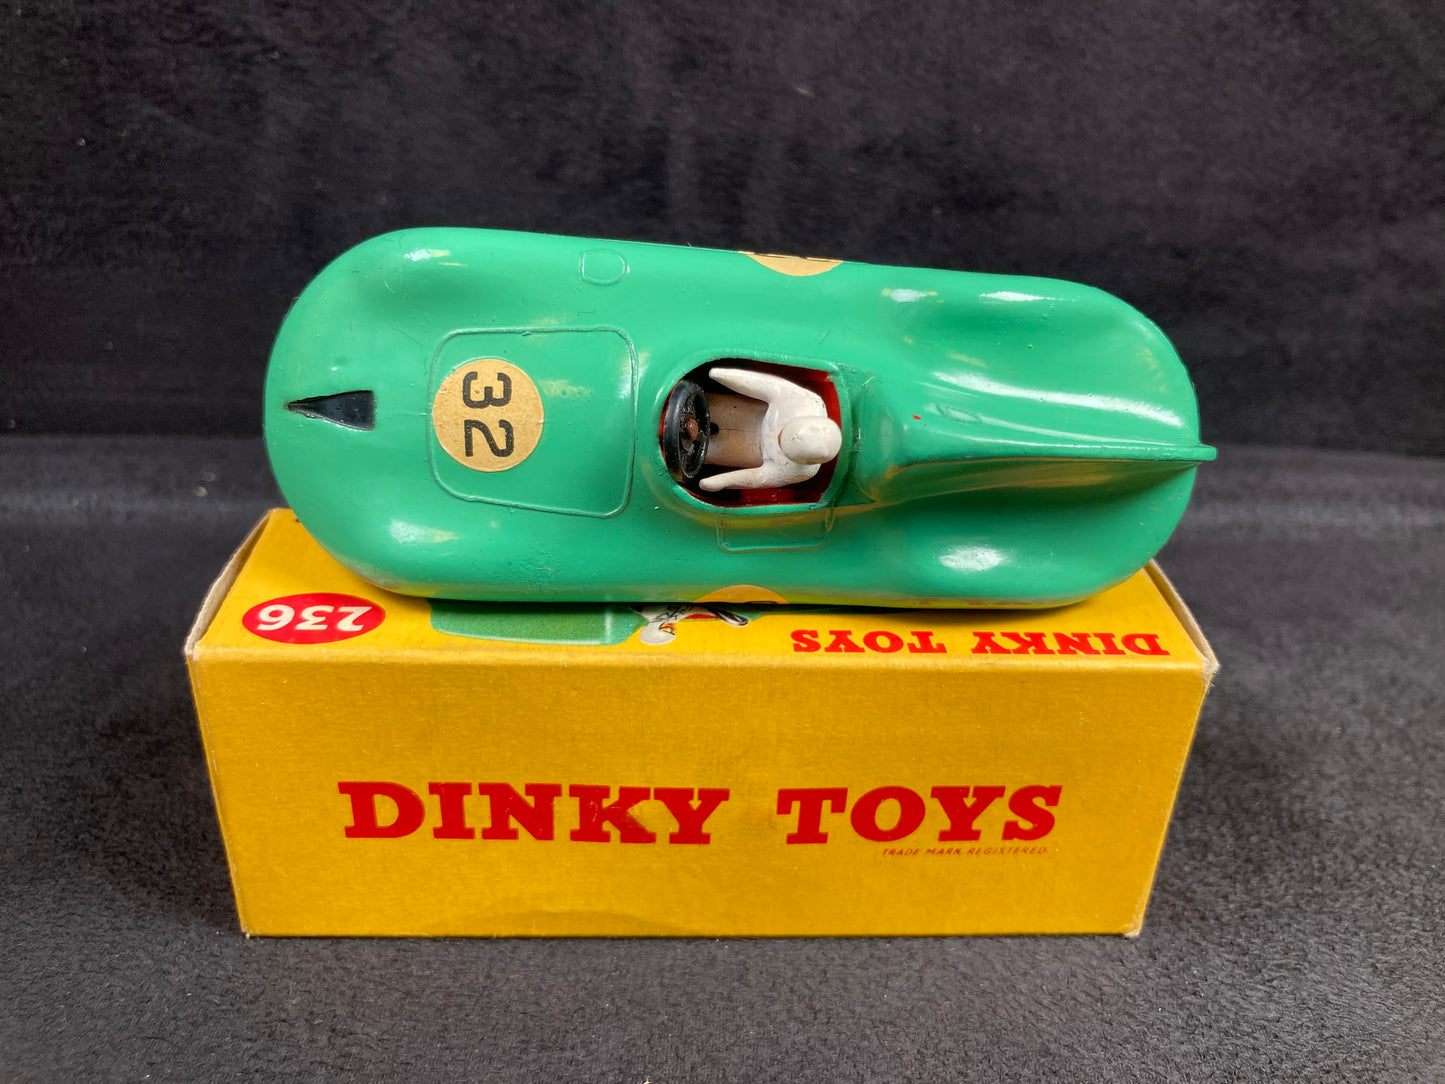 Dinky 236 Connaught Racing Car & Trade Box,  99%  Mint/Boxed!